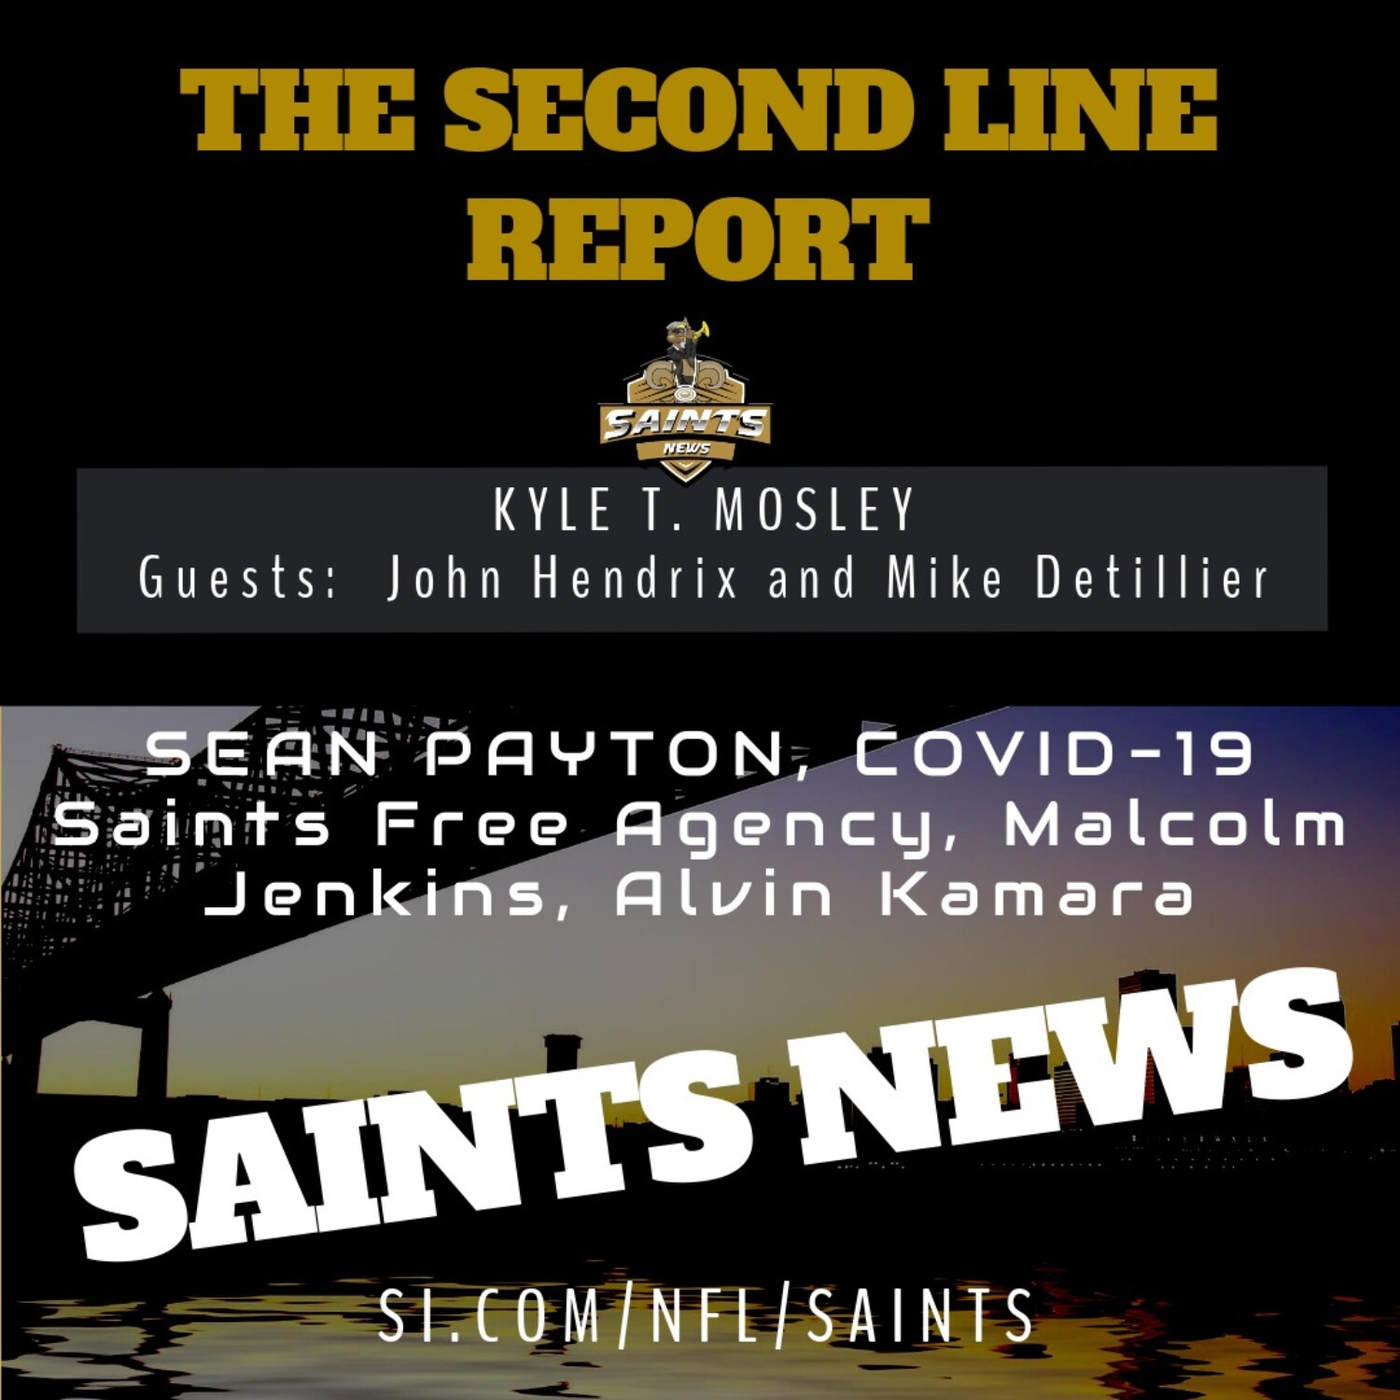 The Second Line Report -  Sean Payton Update with John Hendrix and Mike Detillier